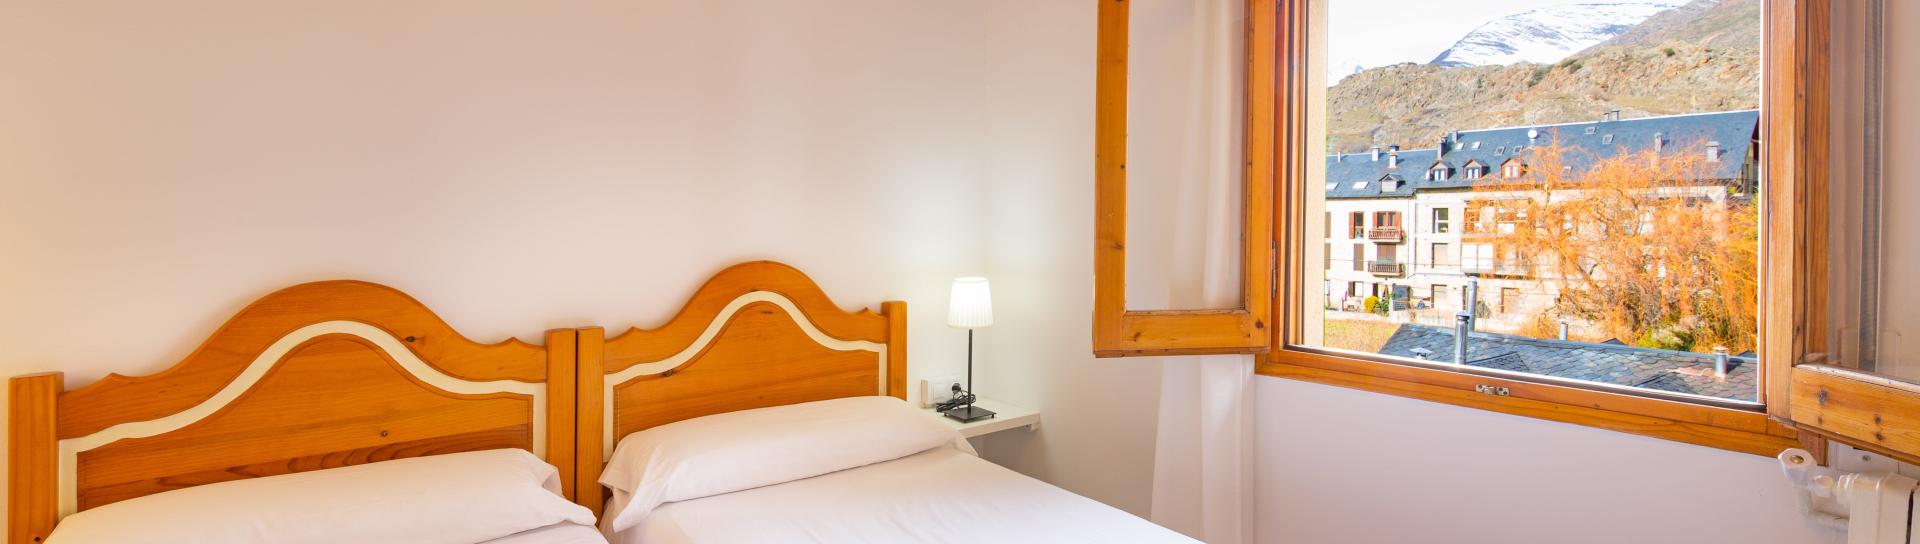 Discover the rooms of Hostal Trainera